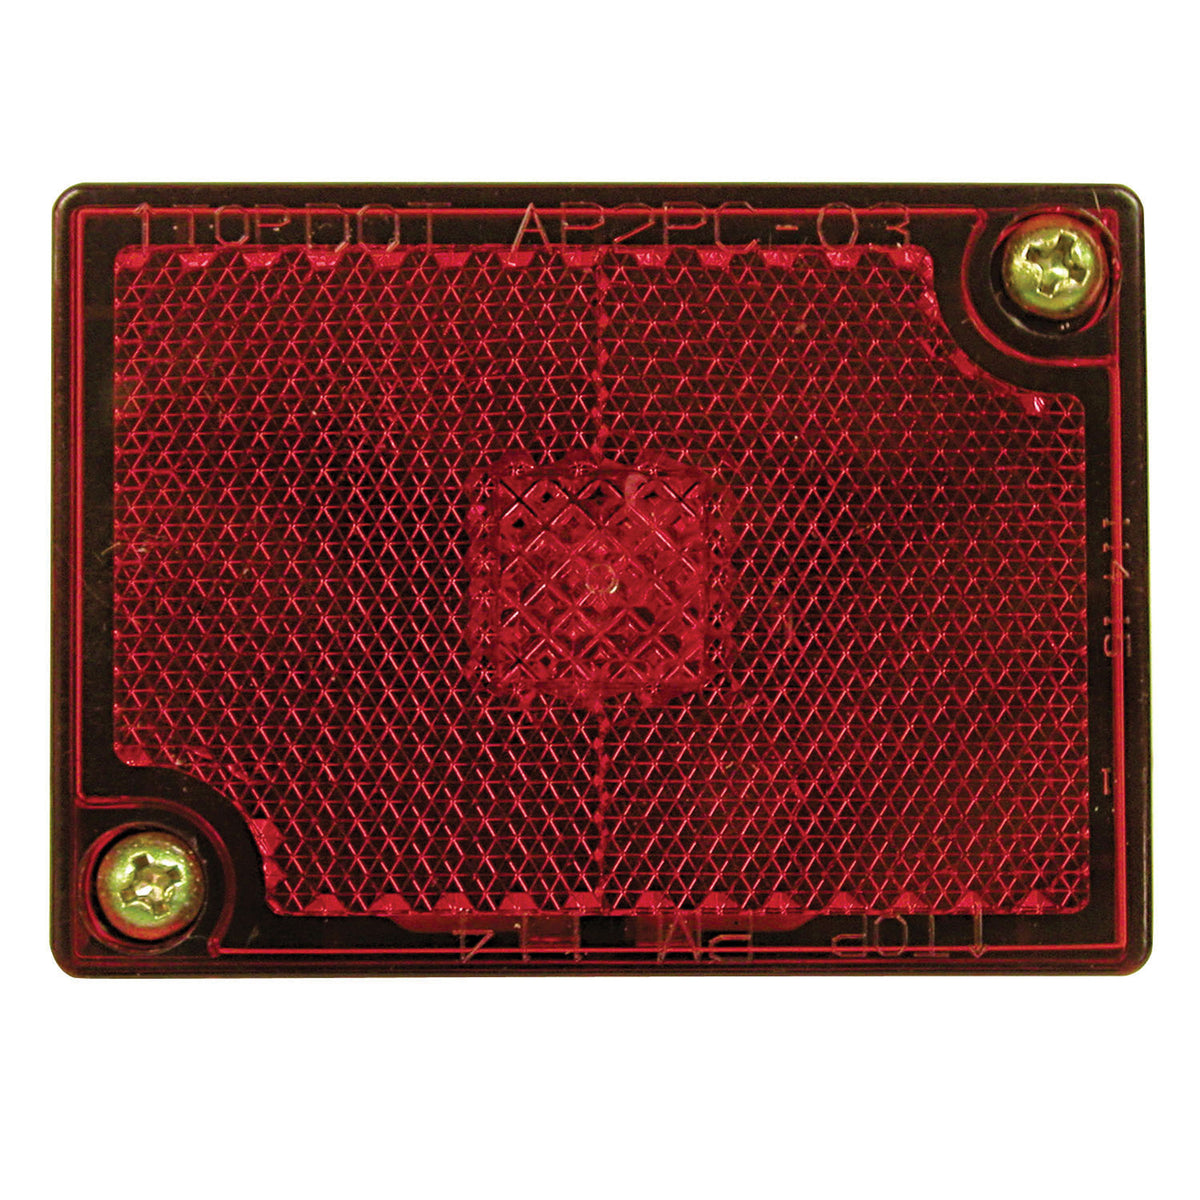 Peterson E114R Incandescent PC-Rated Rectangular Clearance/Side Marker Light with Reflex - Red, 2.75" x 2.05"